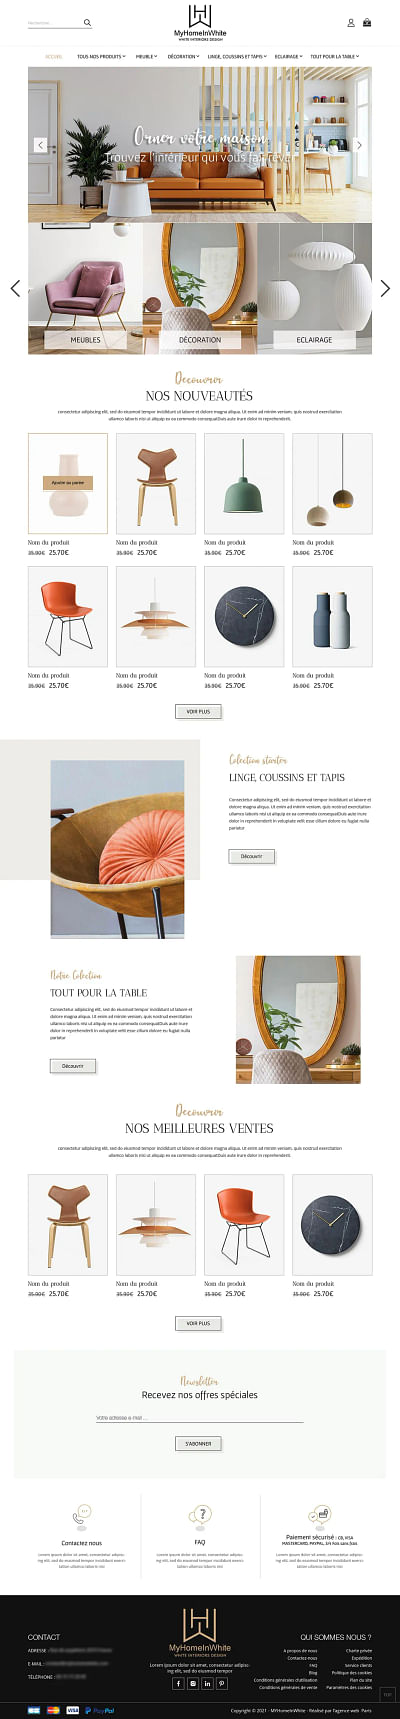 My Home in white | Création site web E-commerce - E-commerce